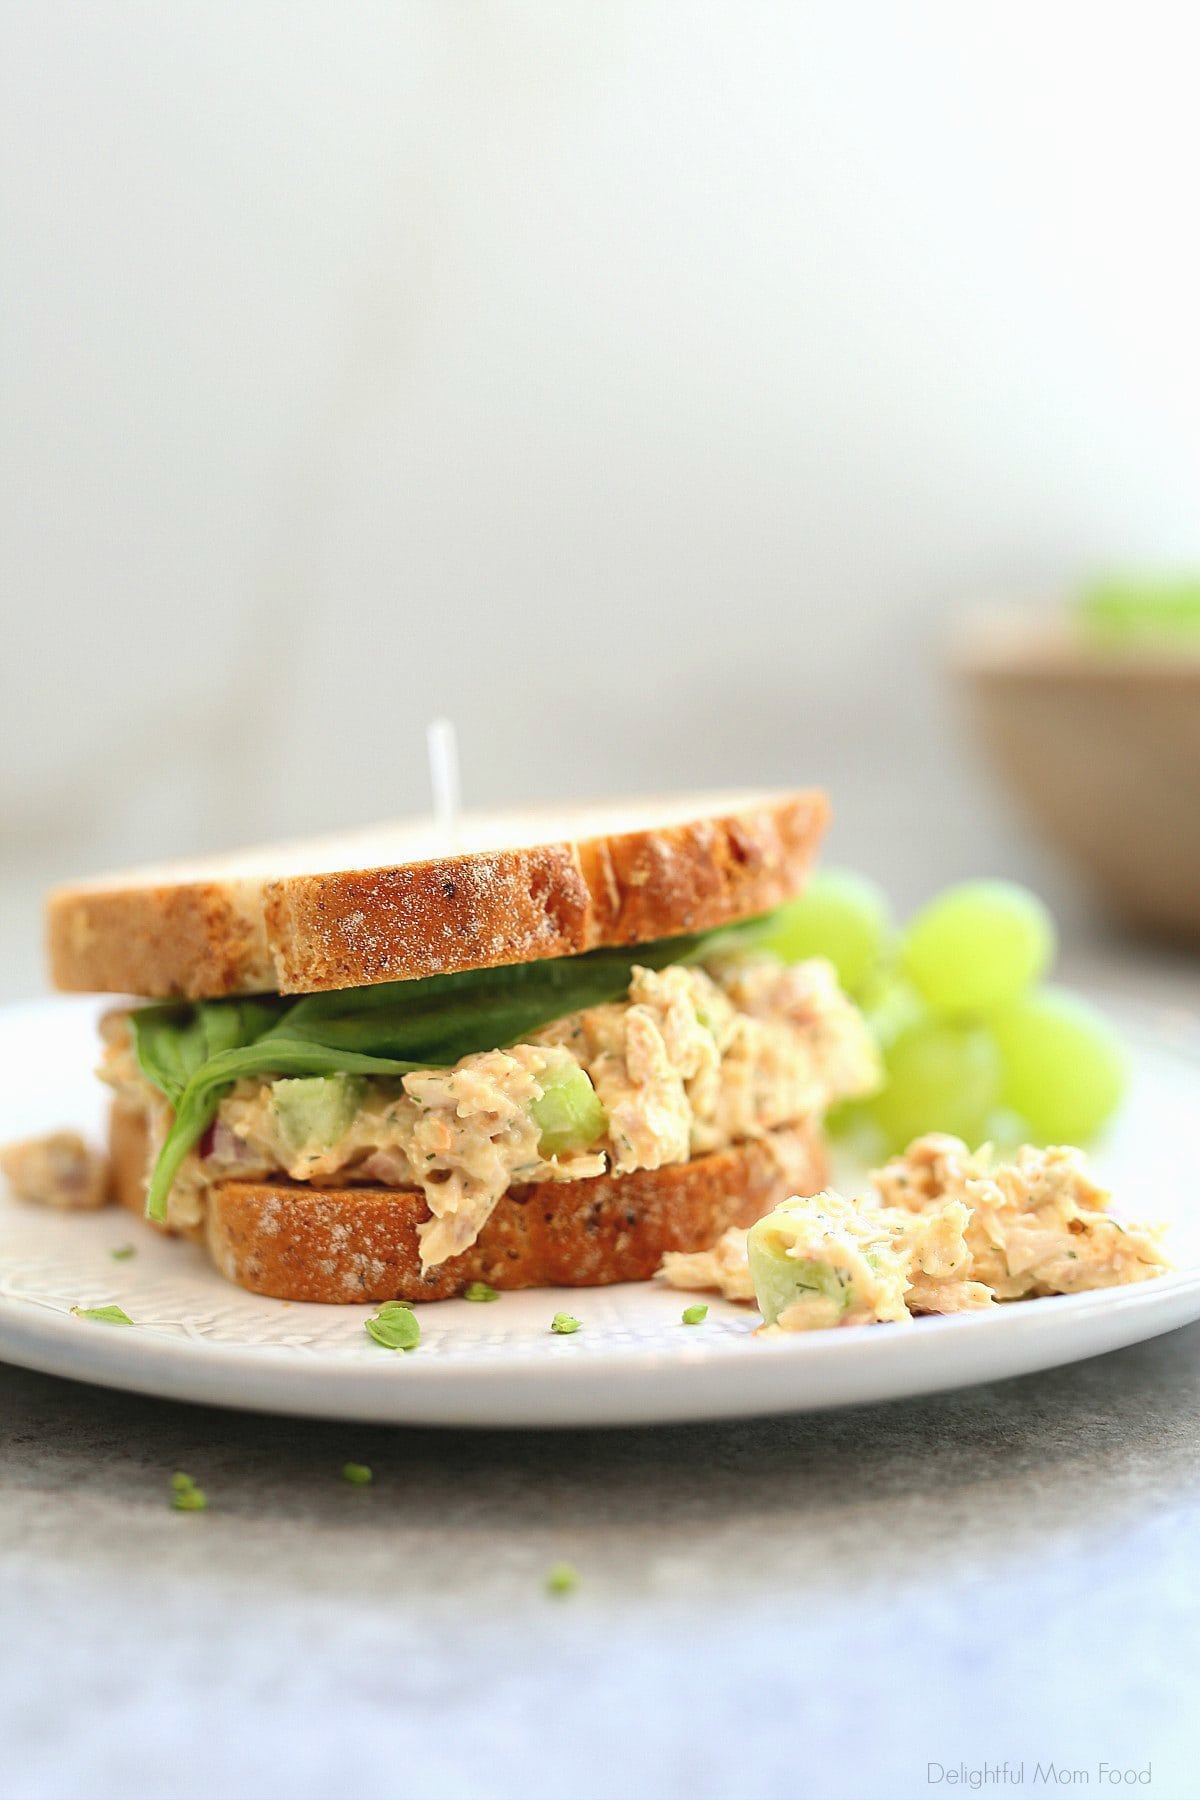 Chickpea Tuna Salad Sandwich on a Plate with Green Grapes.